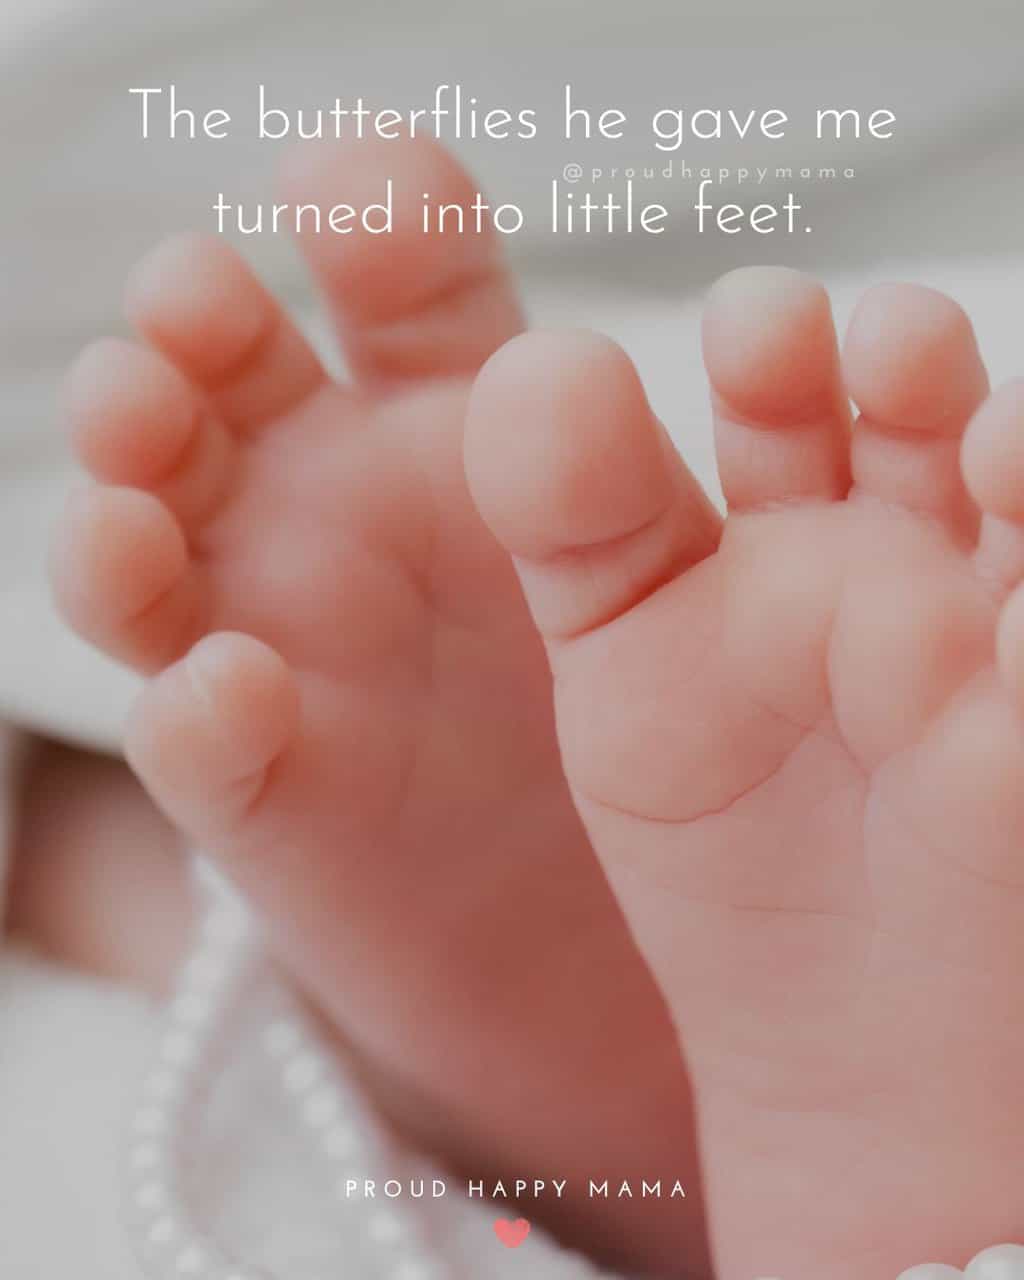 Being Pregnant Quotes | The butterflies he gave me turned into little feet.